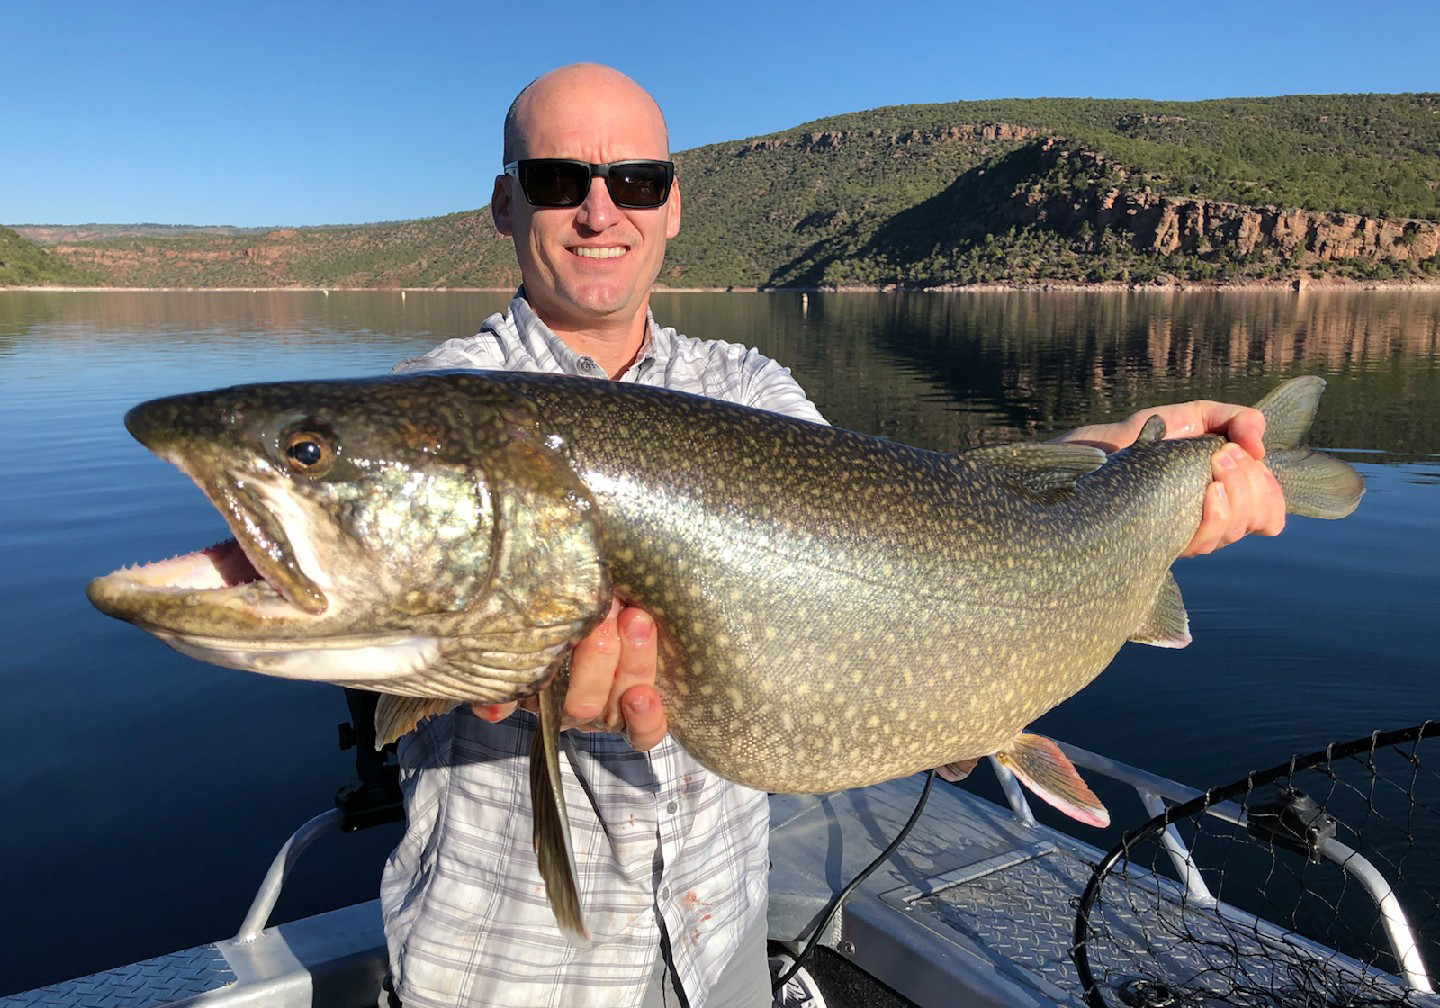 A male angler wearing sunglasses holding a Lake Trout, the biggest of all the Trout of North America. Behind him you can see water and the banks of the lake in the distance.